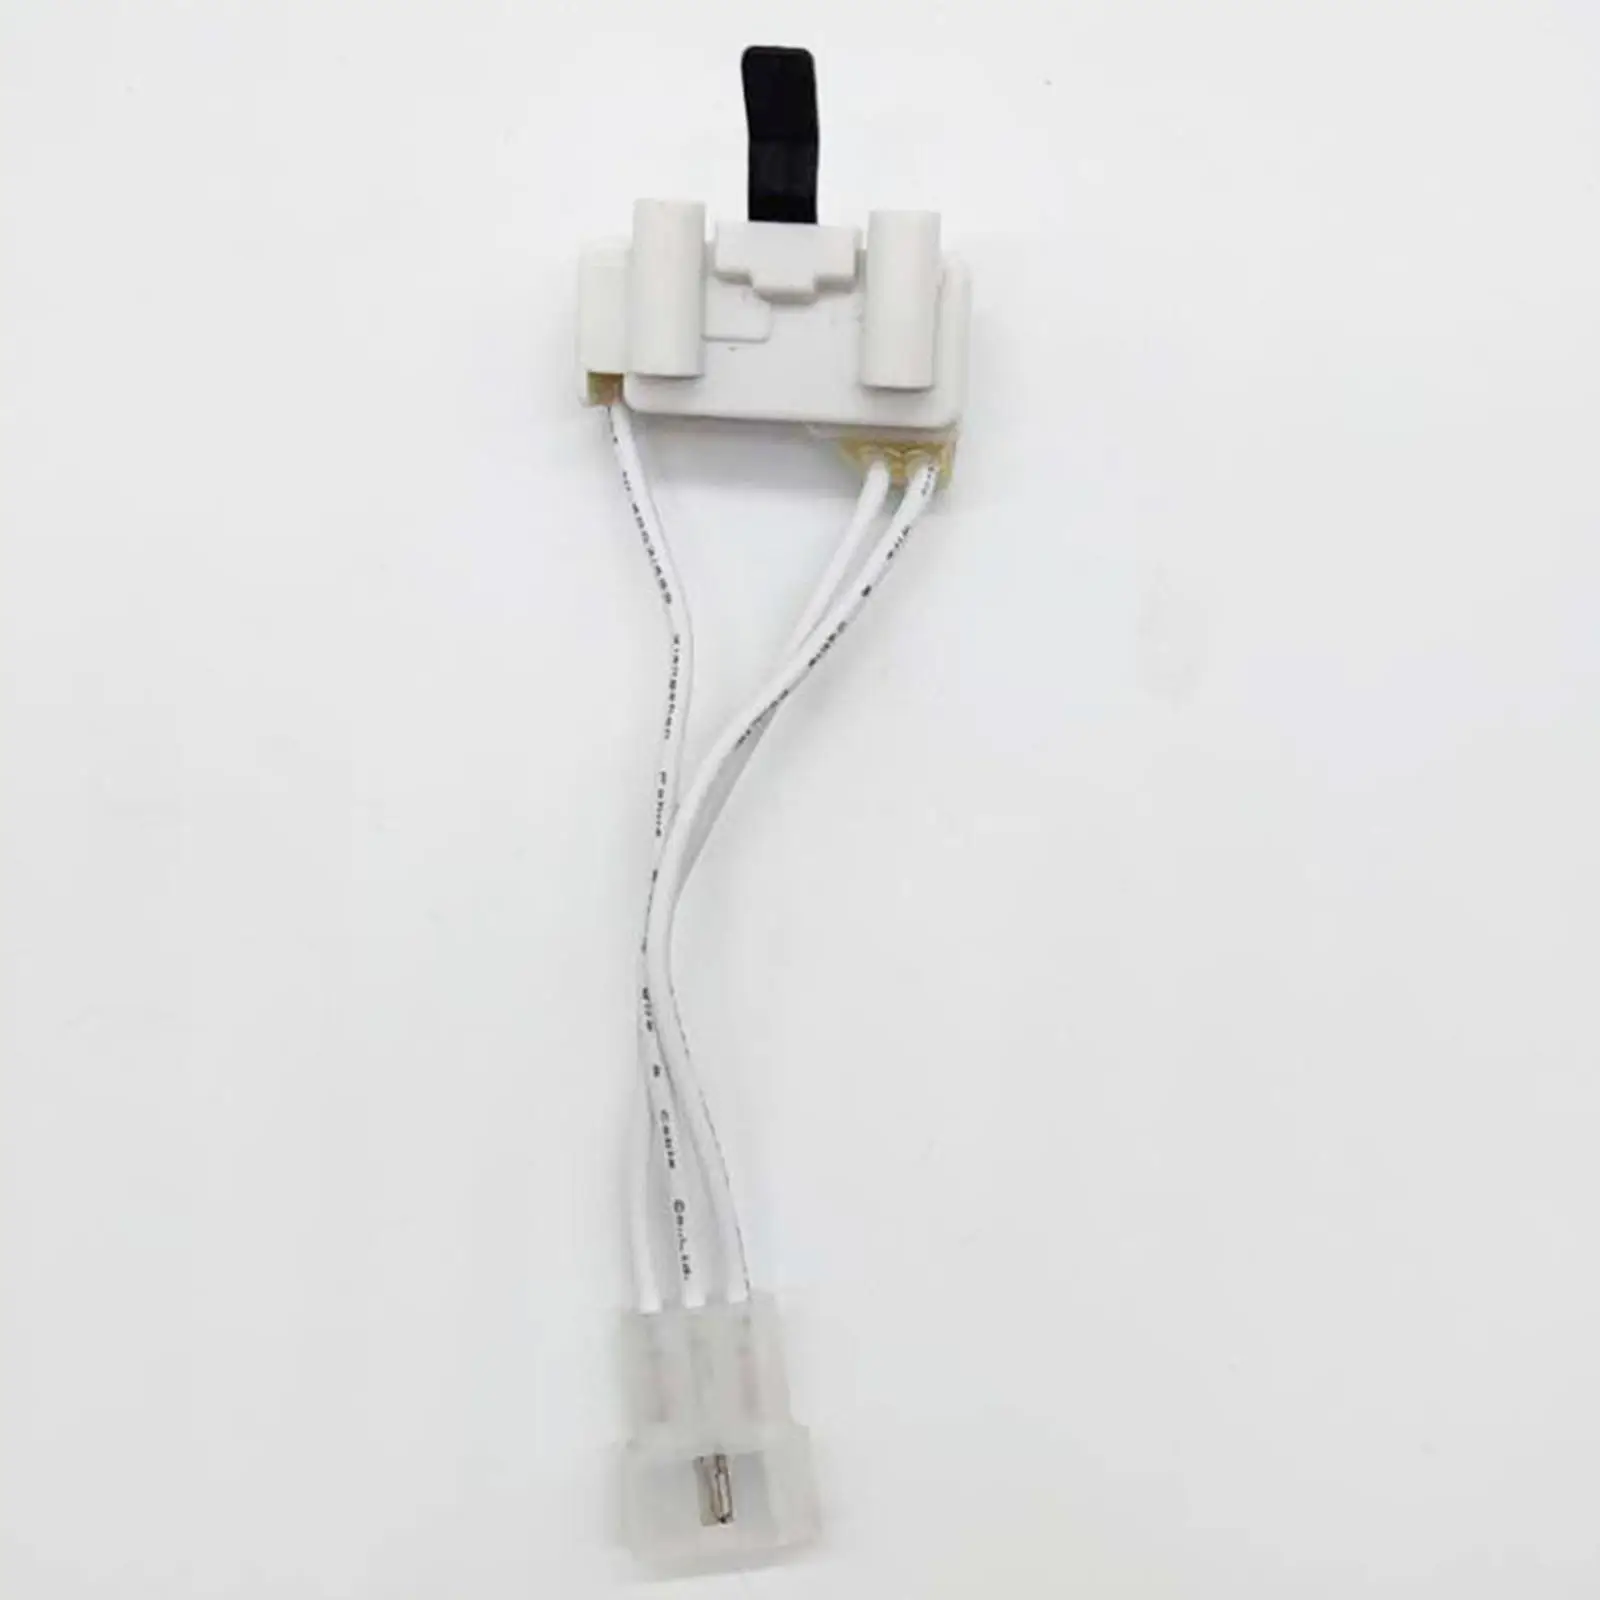 Dryer Door Switch Repair Part Washer Switch Parts for 3406107 Whirlpools